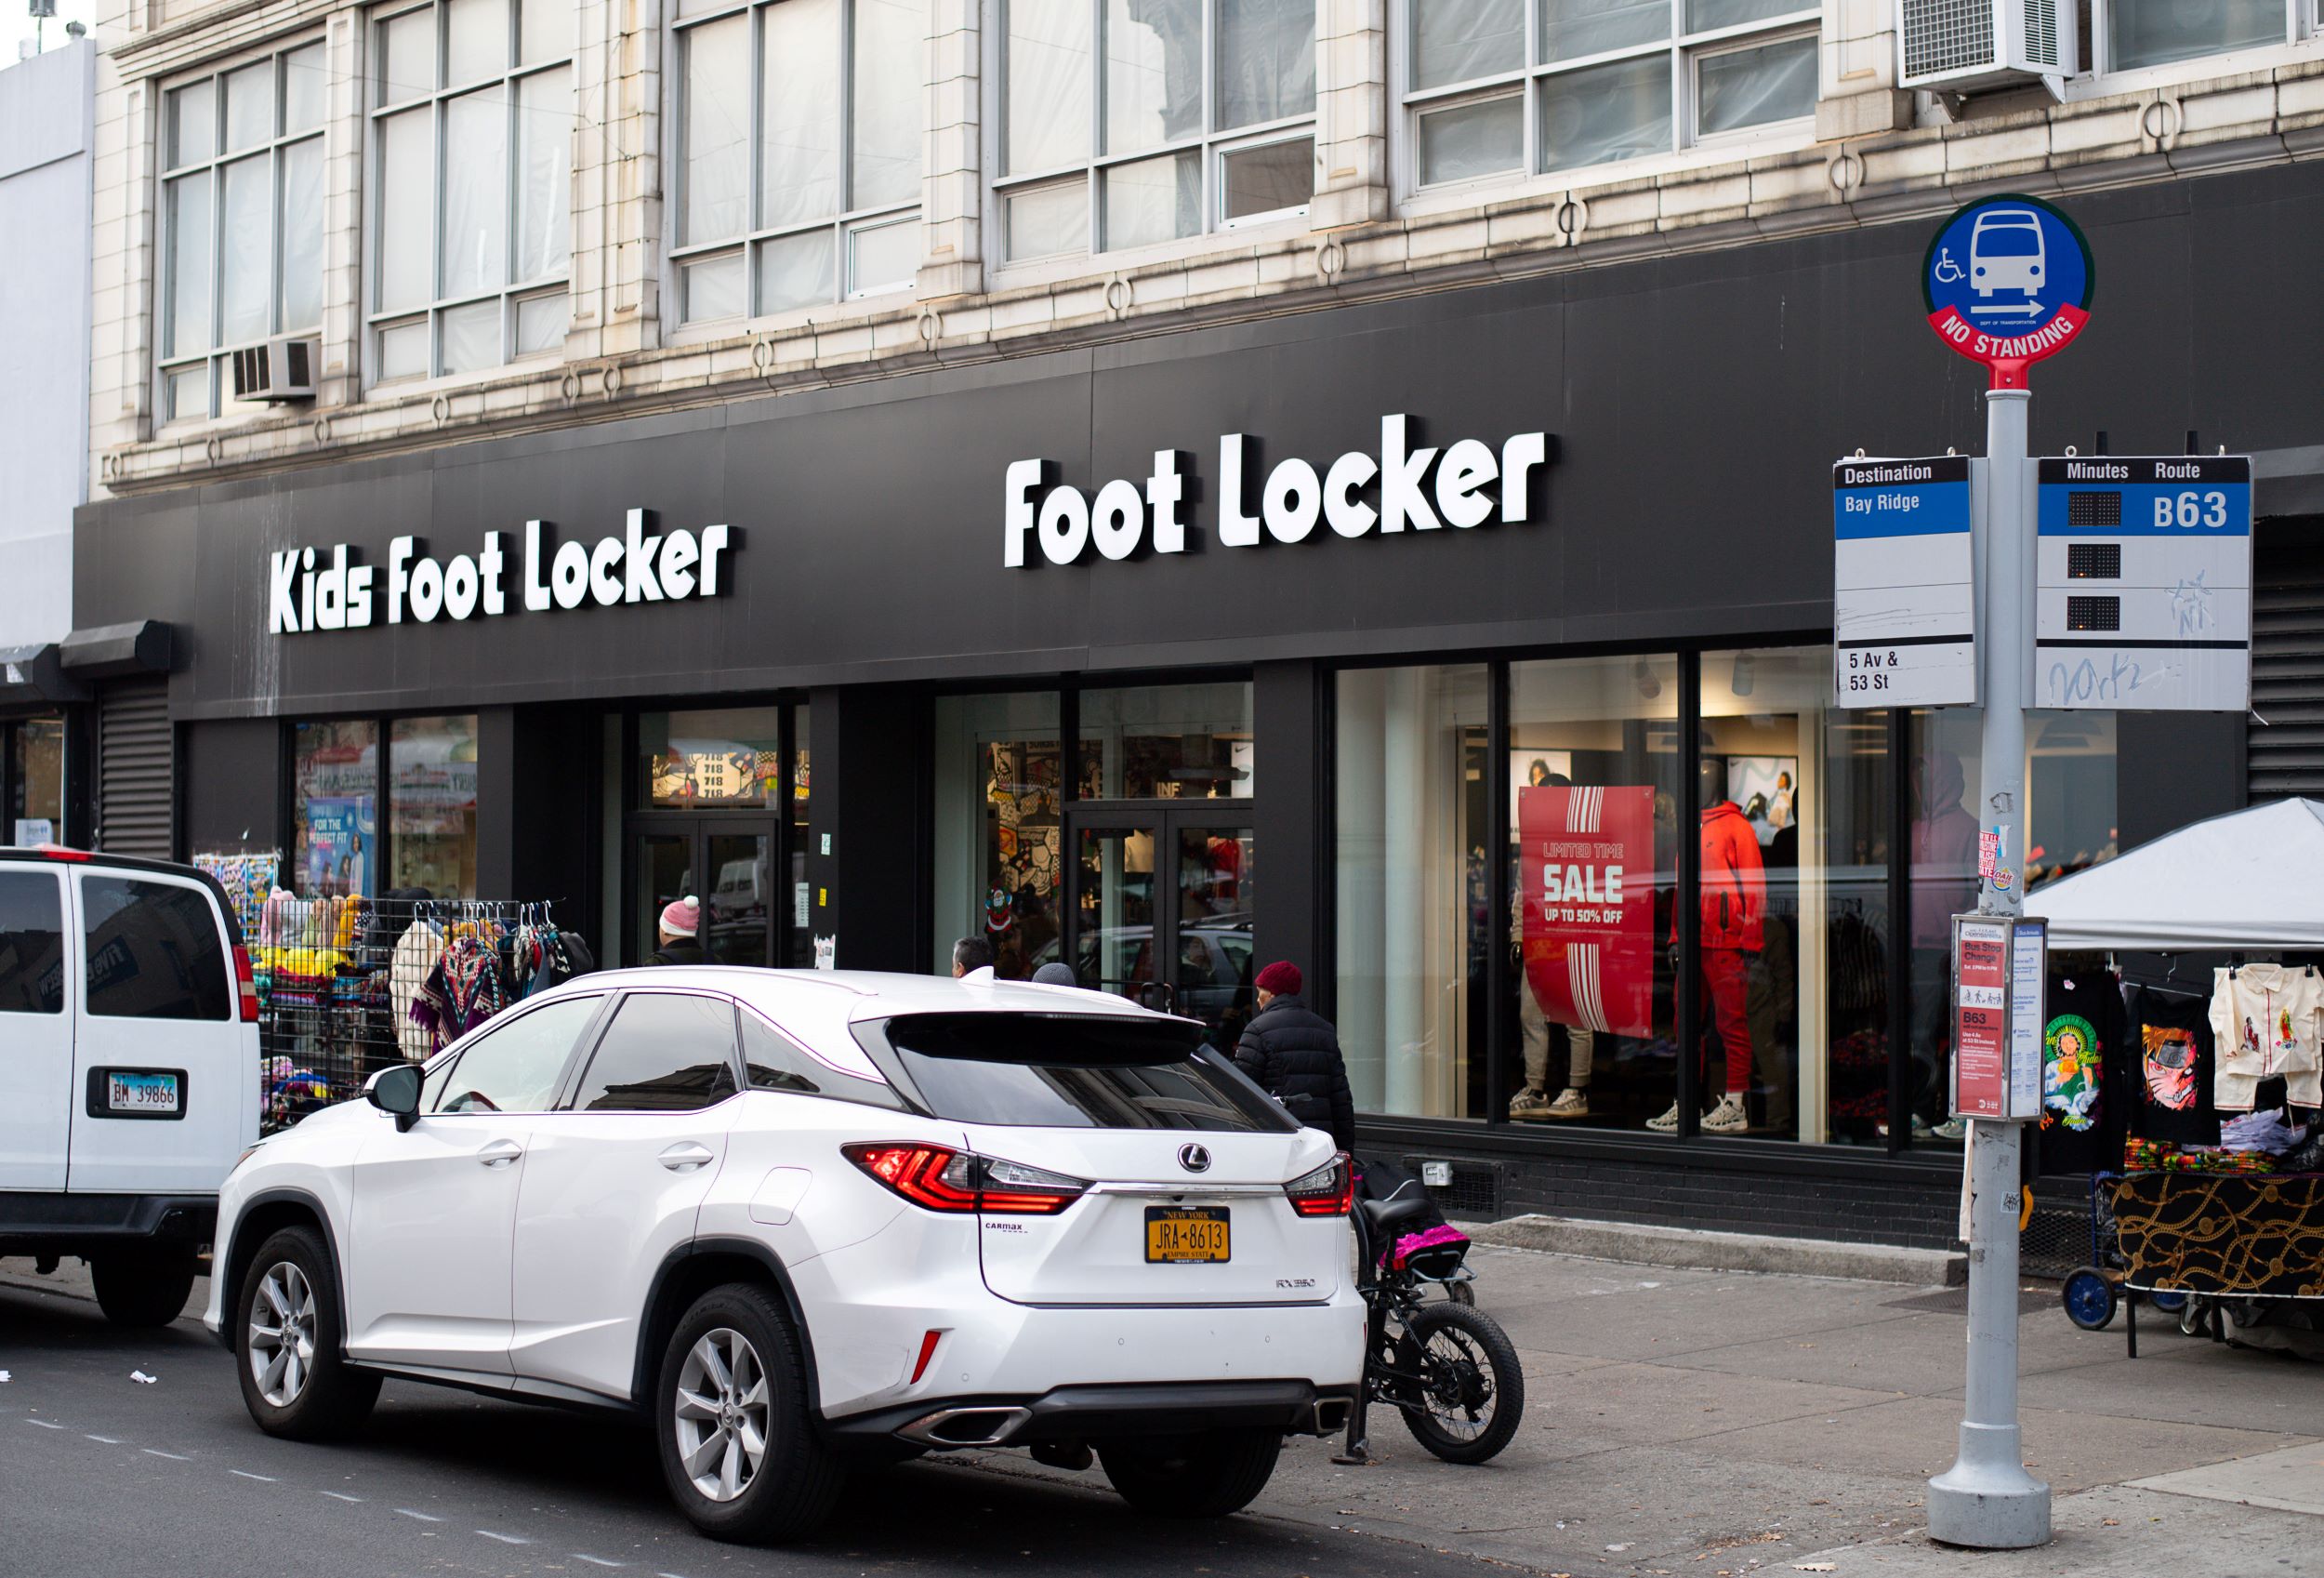 Street view showcasing a foot locker store with visible signage, adjacent to a kids foot locker, with cars and a bus stop sign in the foreground.